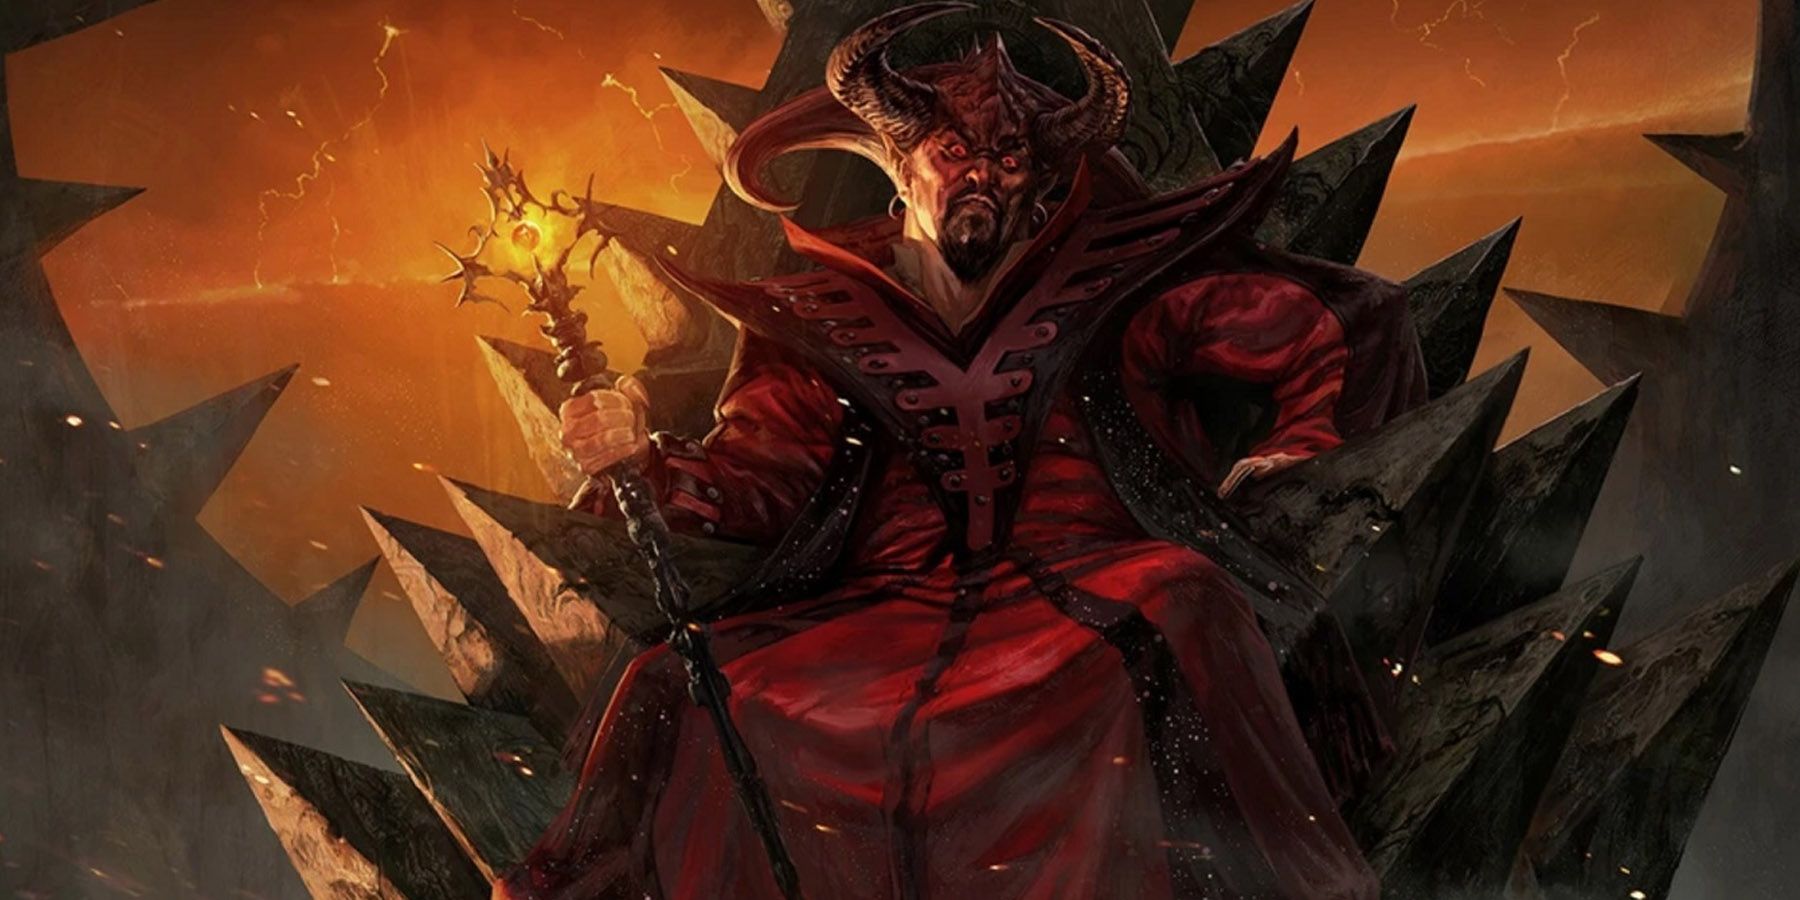 Asmodeus from the D&D 5e Descent to Avernus